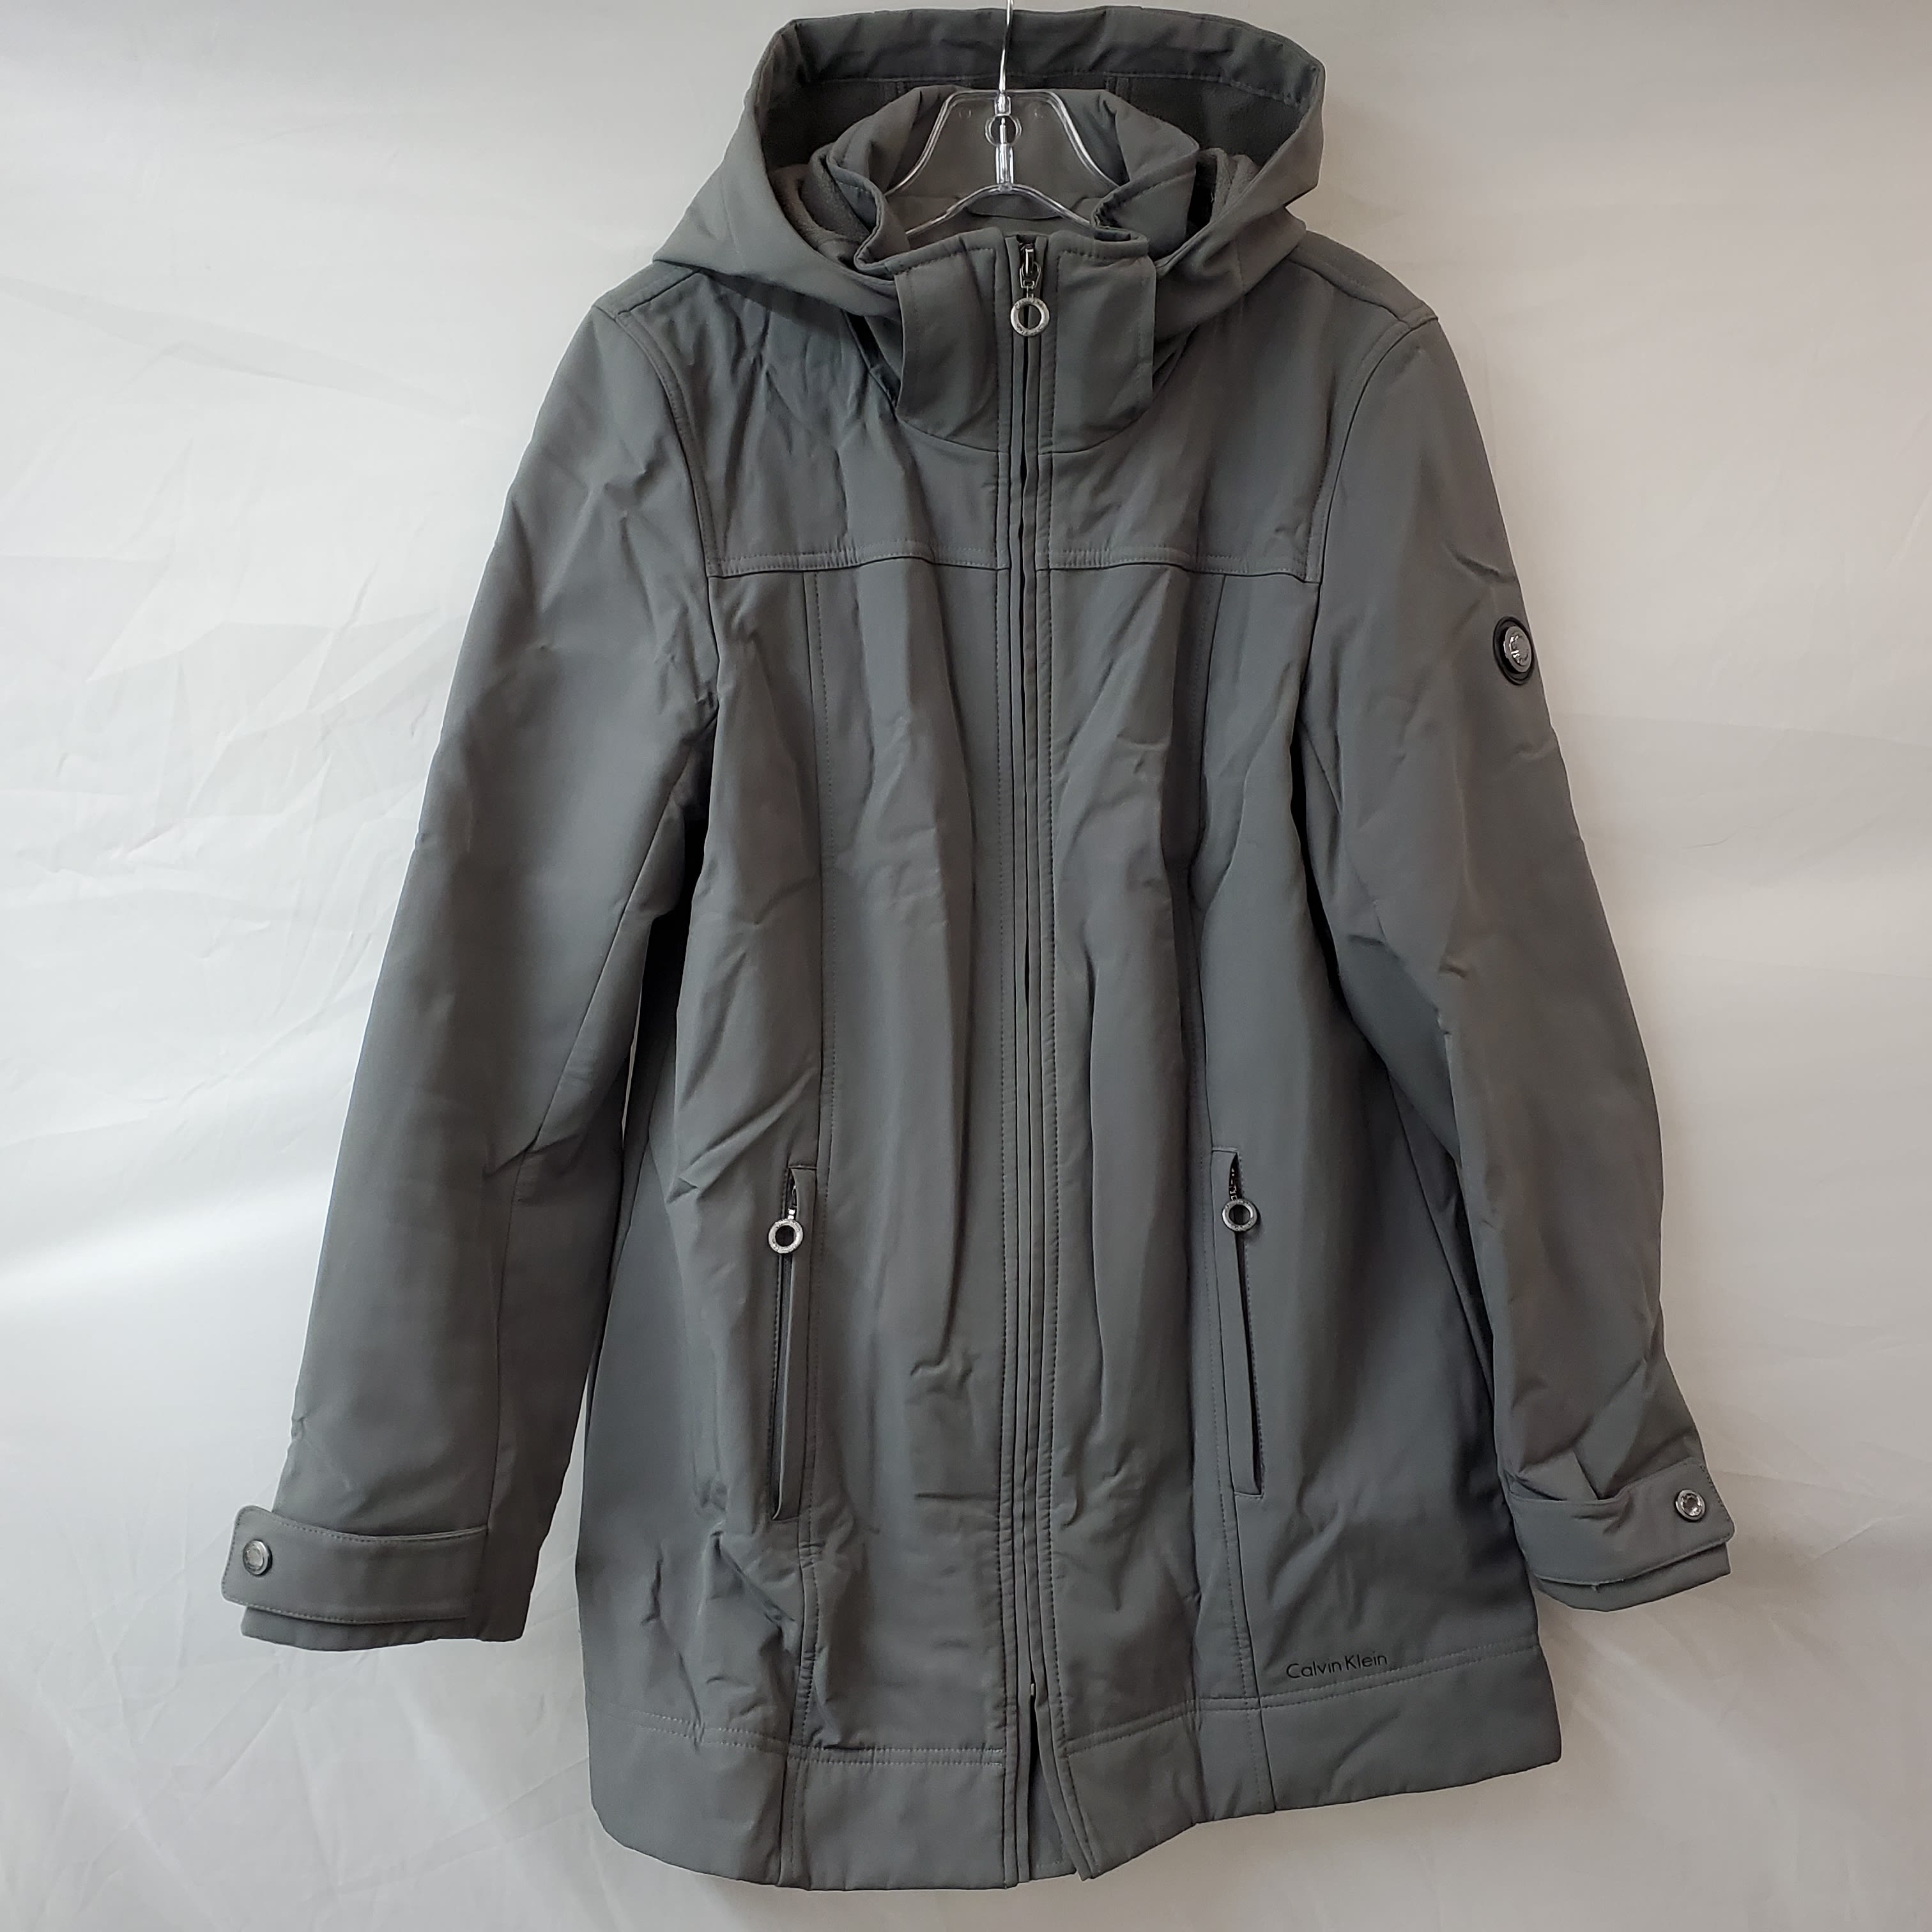 3-in-1 water resistant hooded jacket - Calvin Klein, got this at Costco for  a lot less